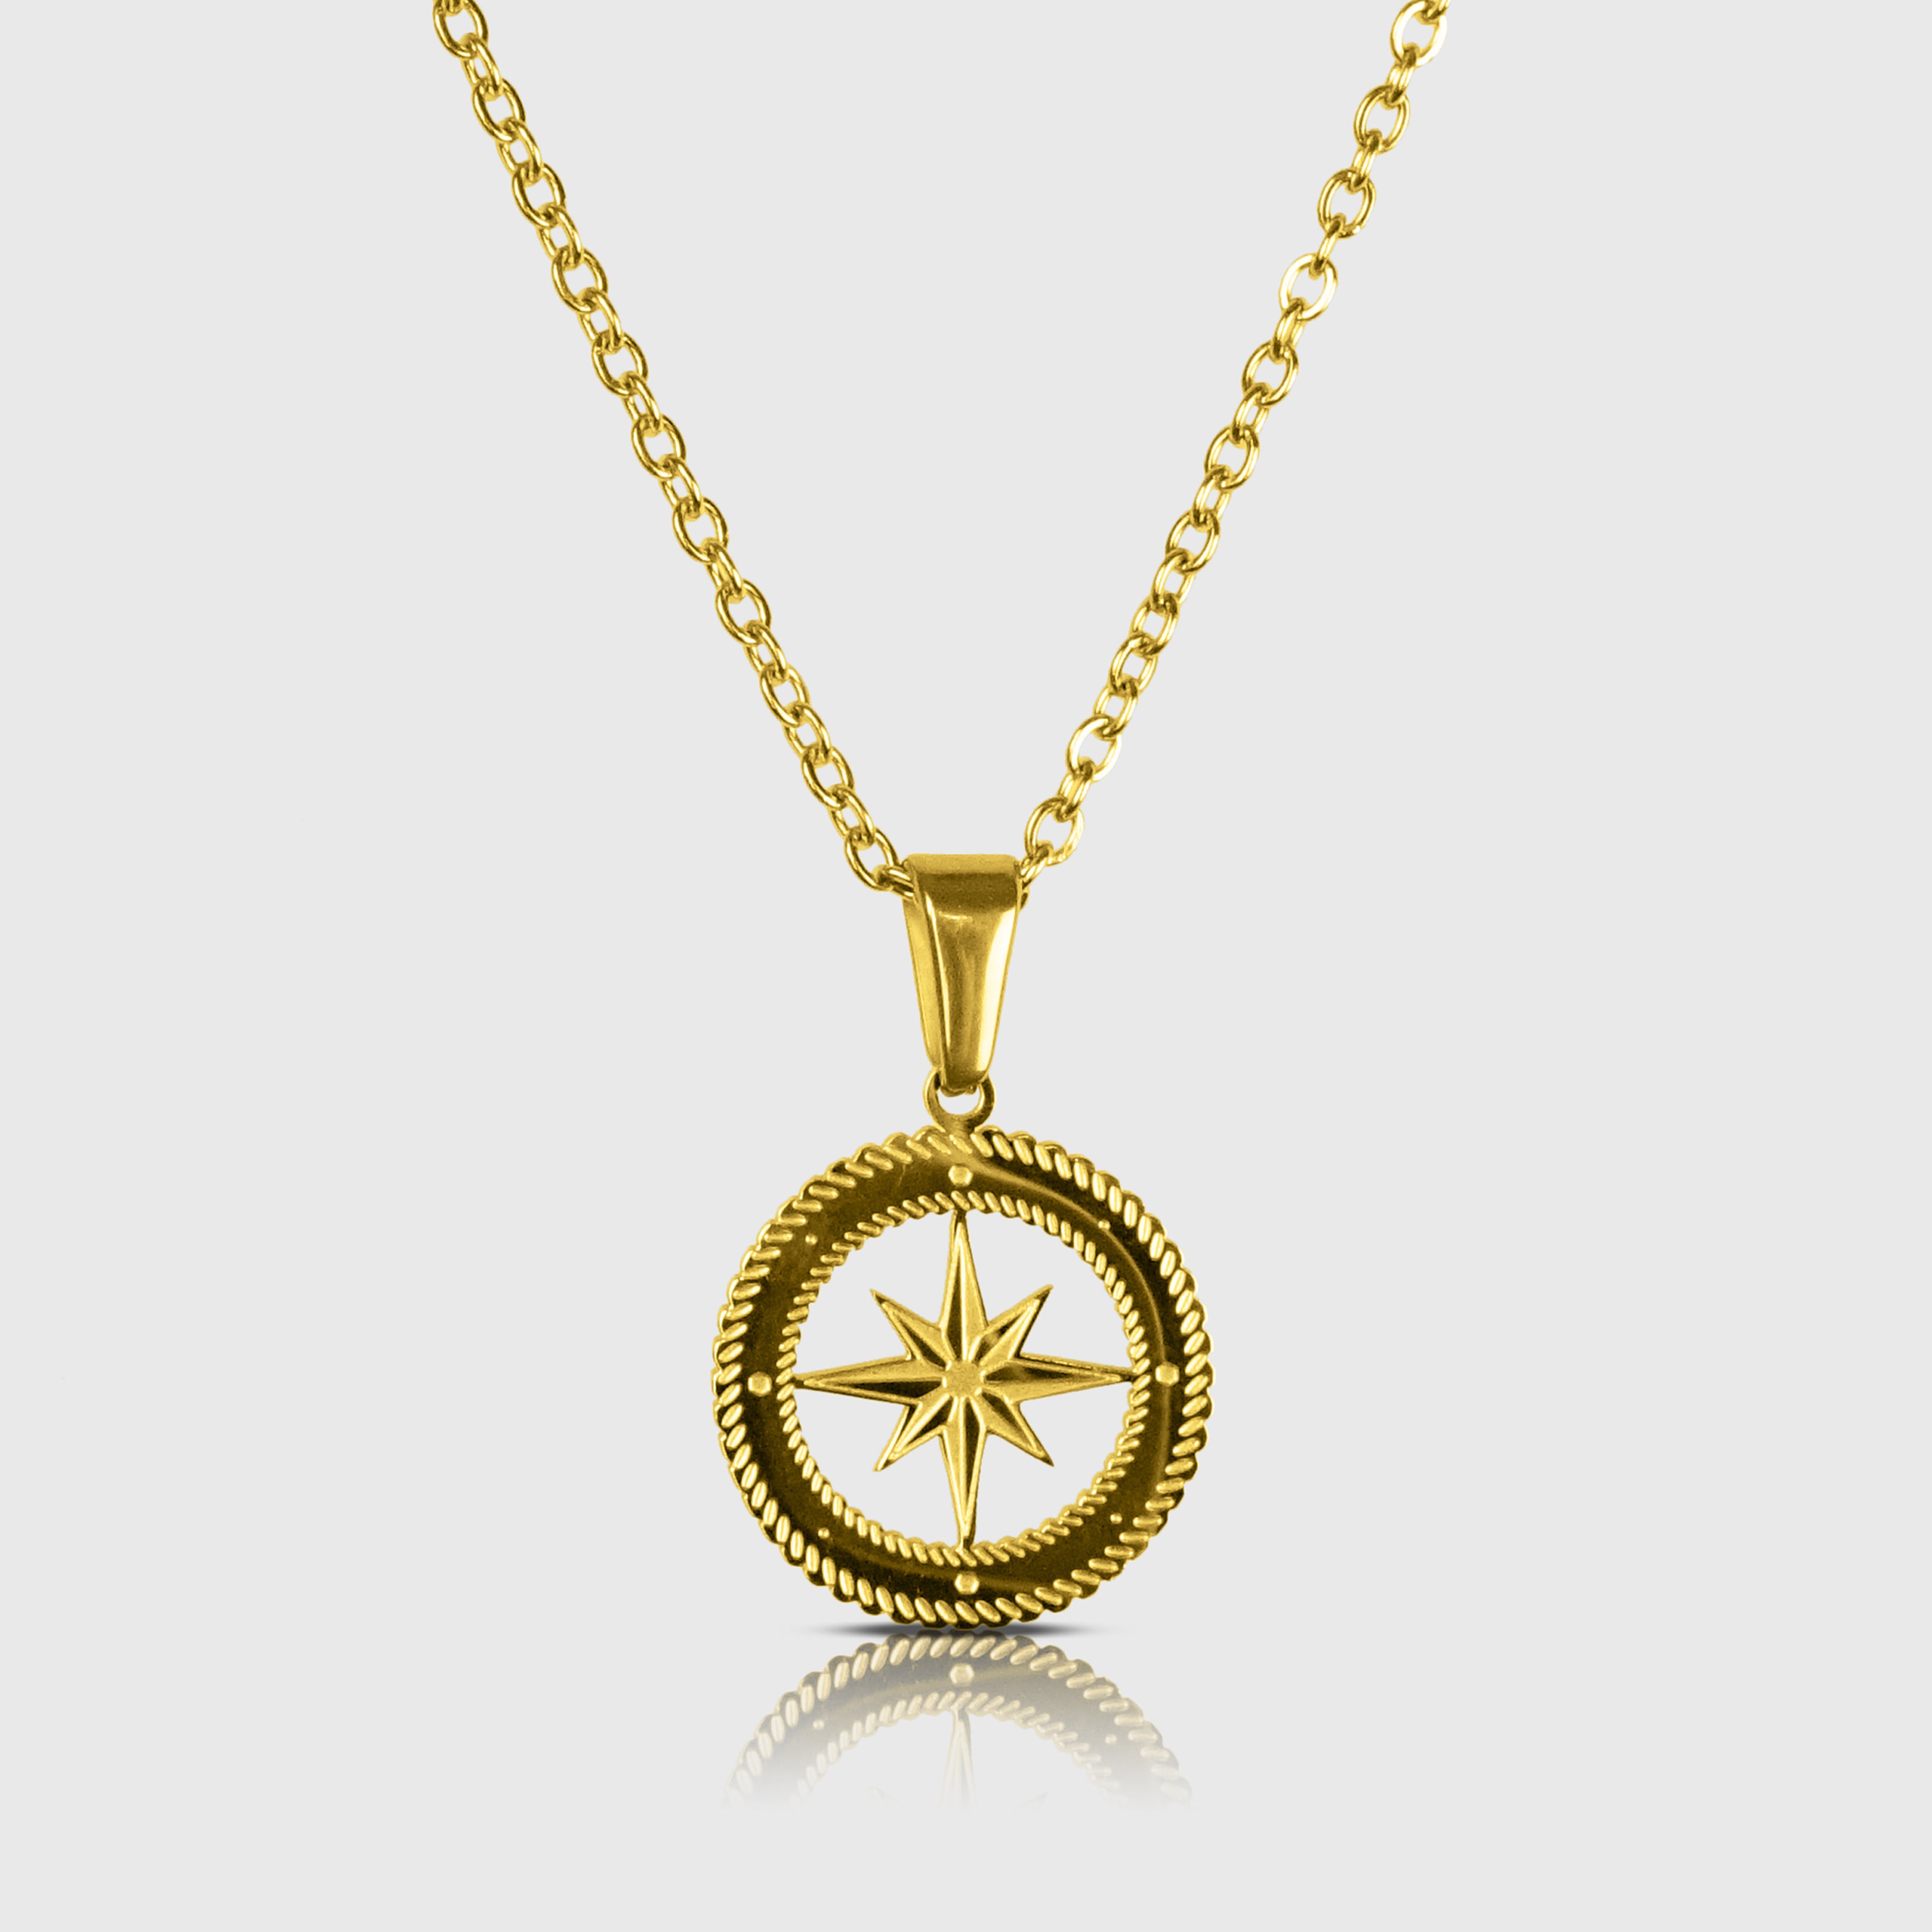 NORTH STAR 2.0 NECKLACE - GOLD TONE